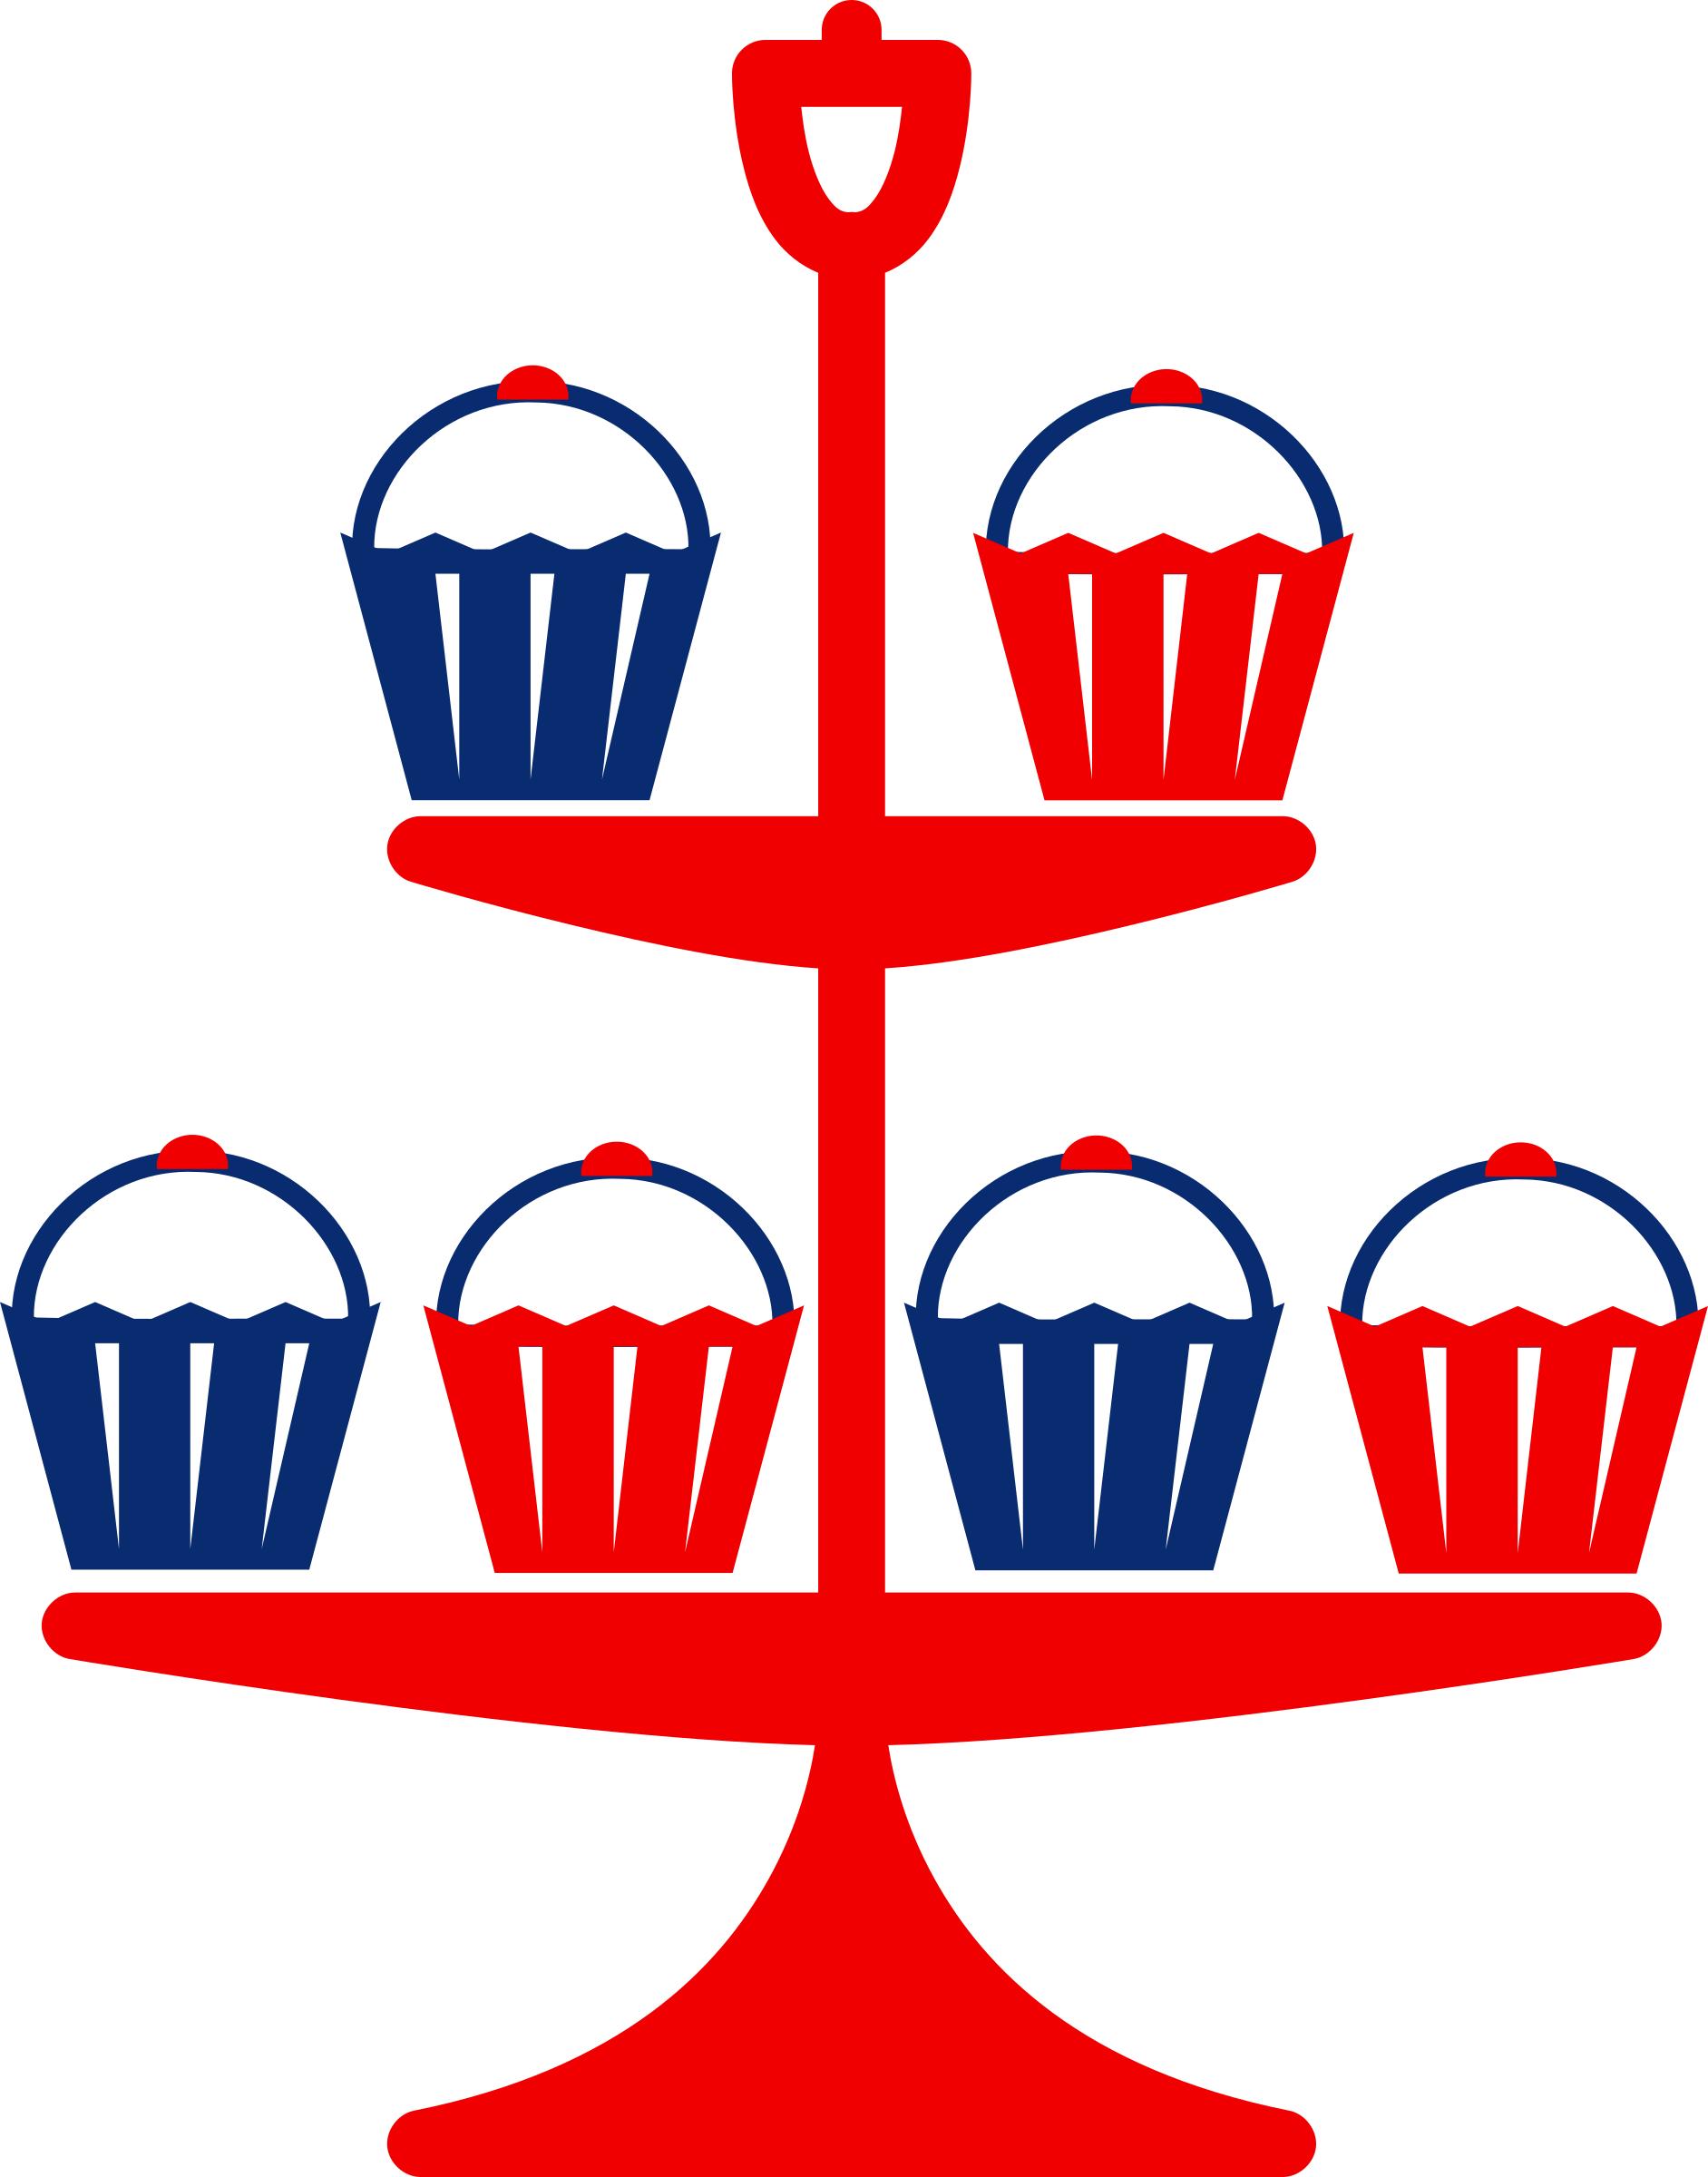 Jubilee cake stand red PNG icons